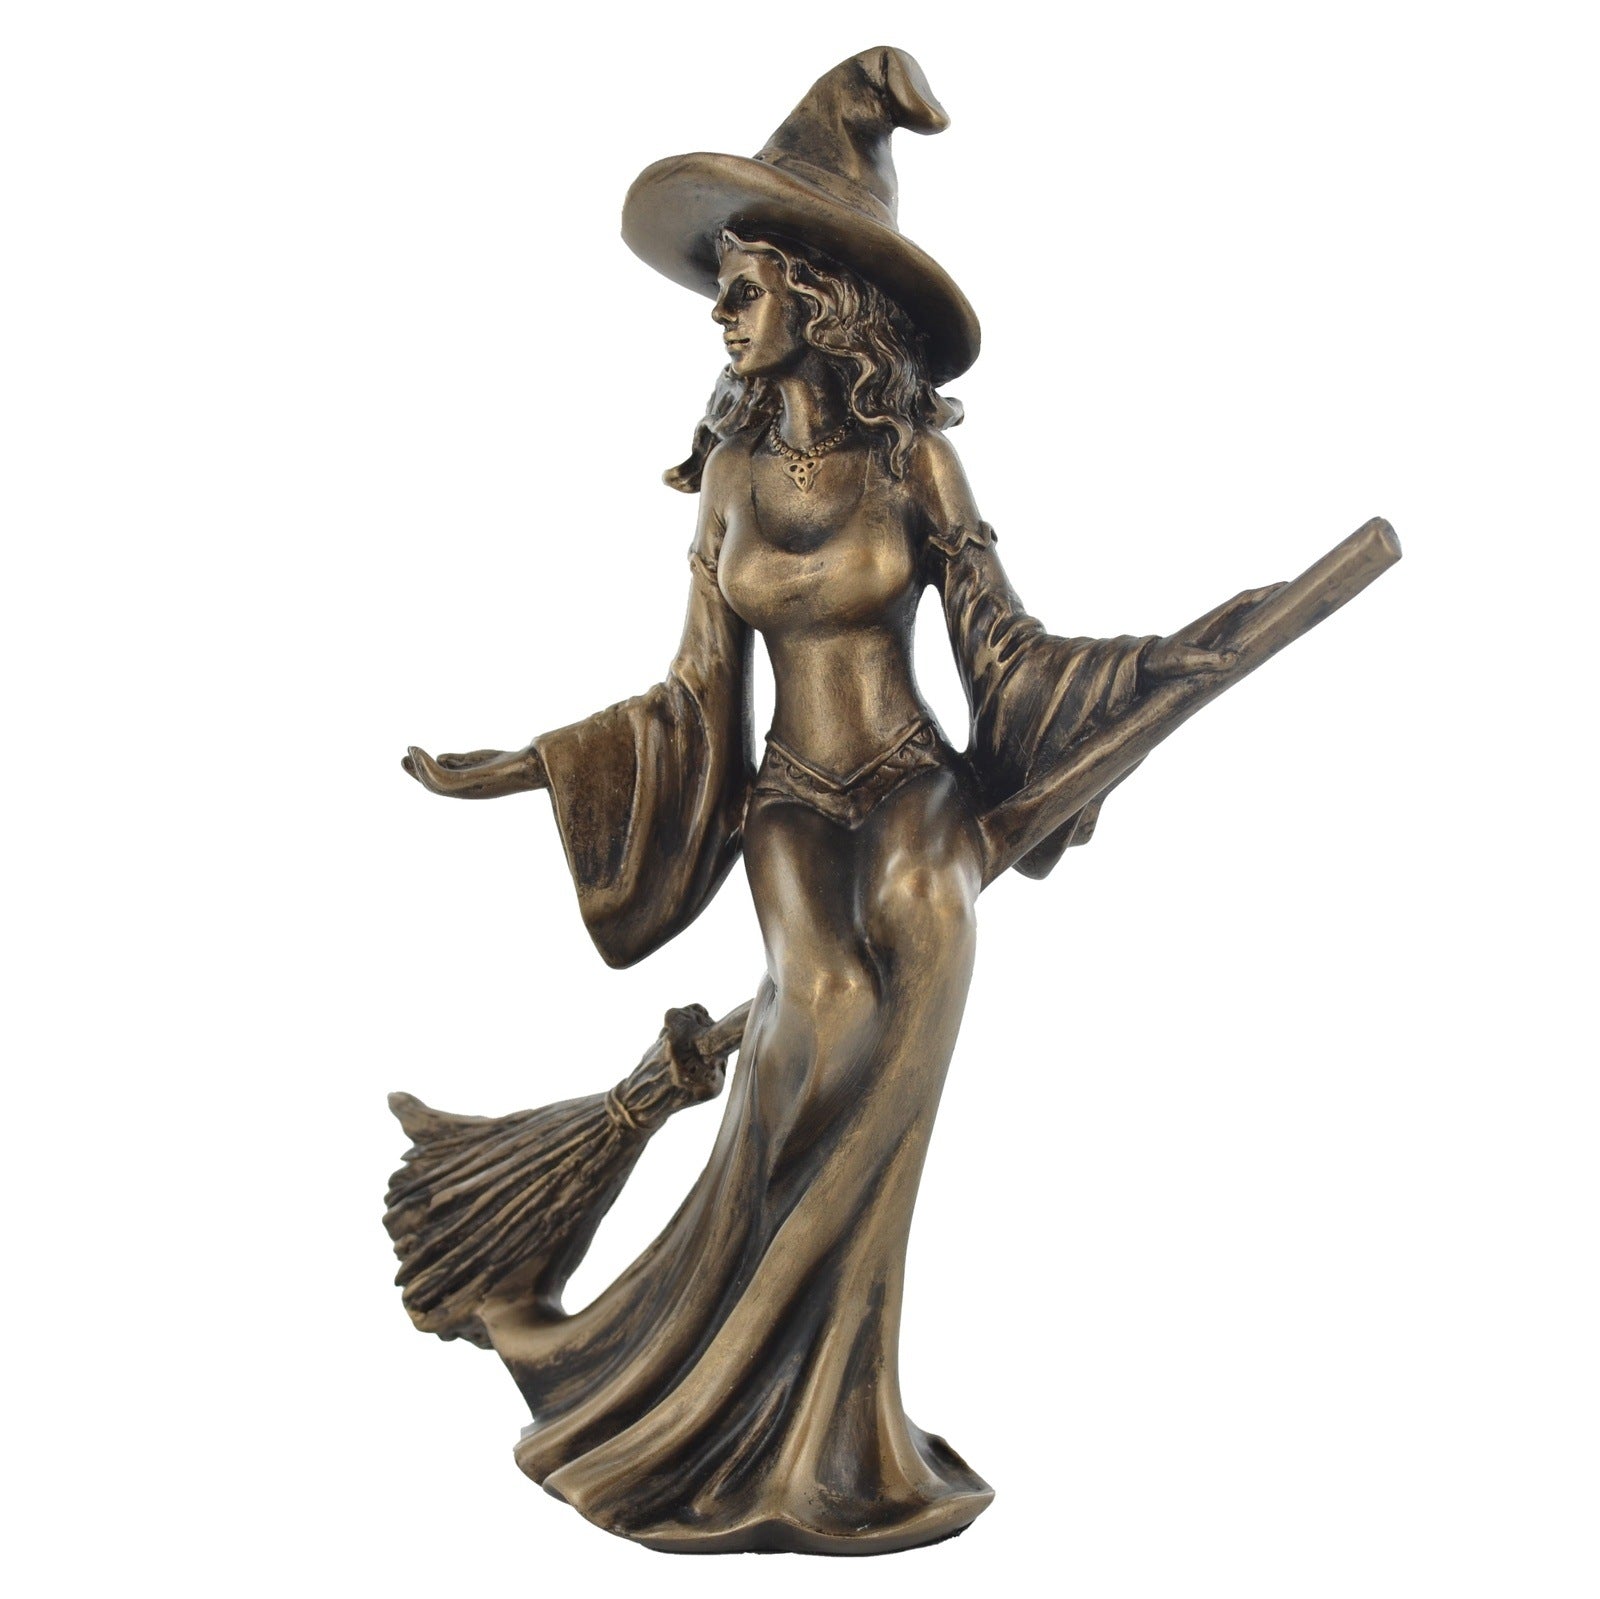 Witch Riding Broom Figurine In Bronze Finish